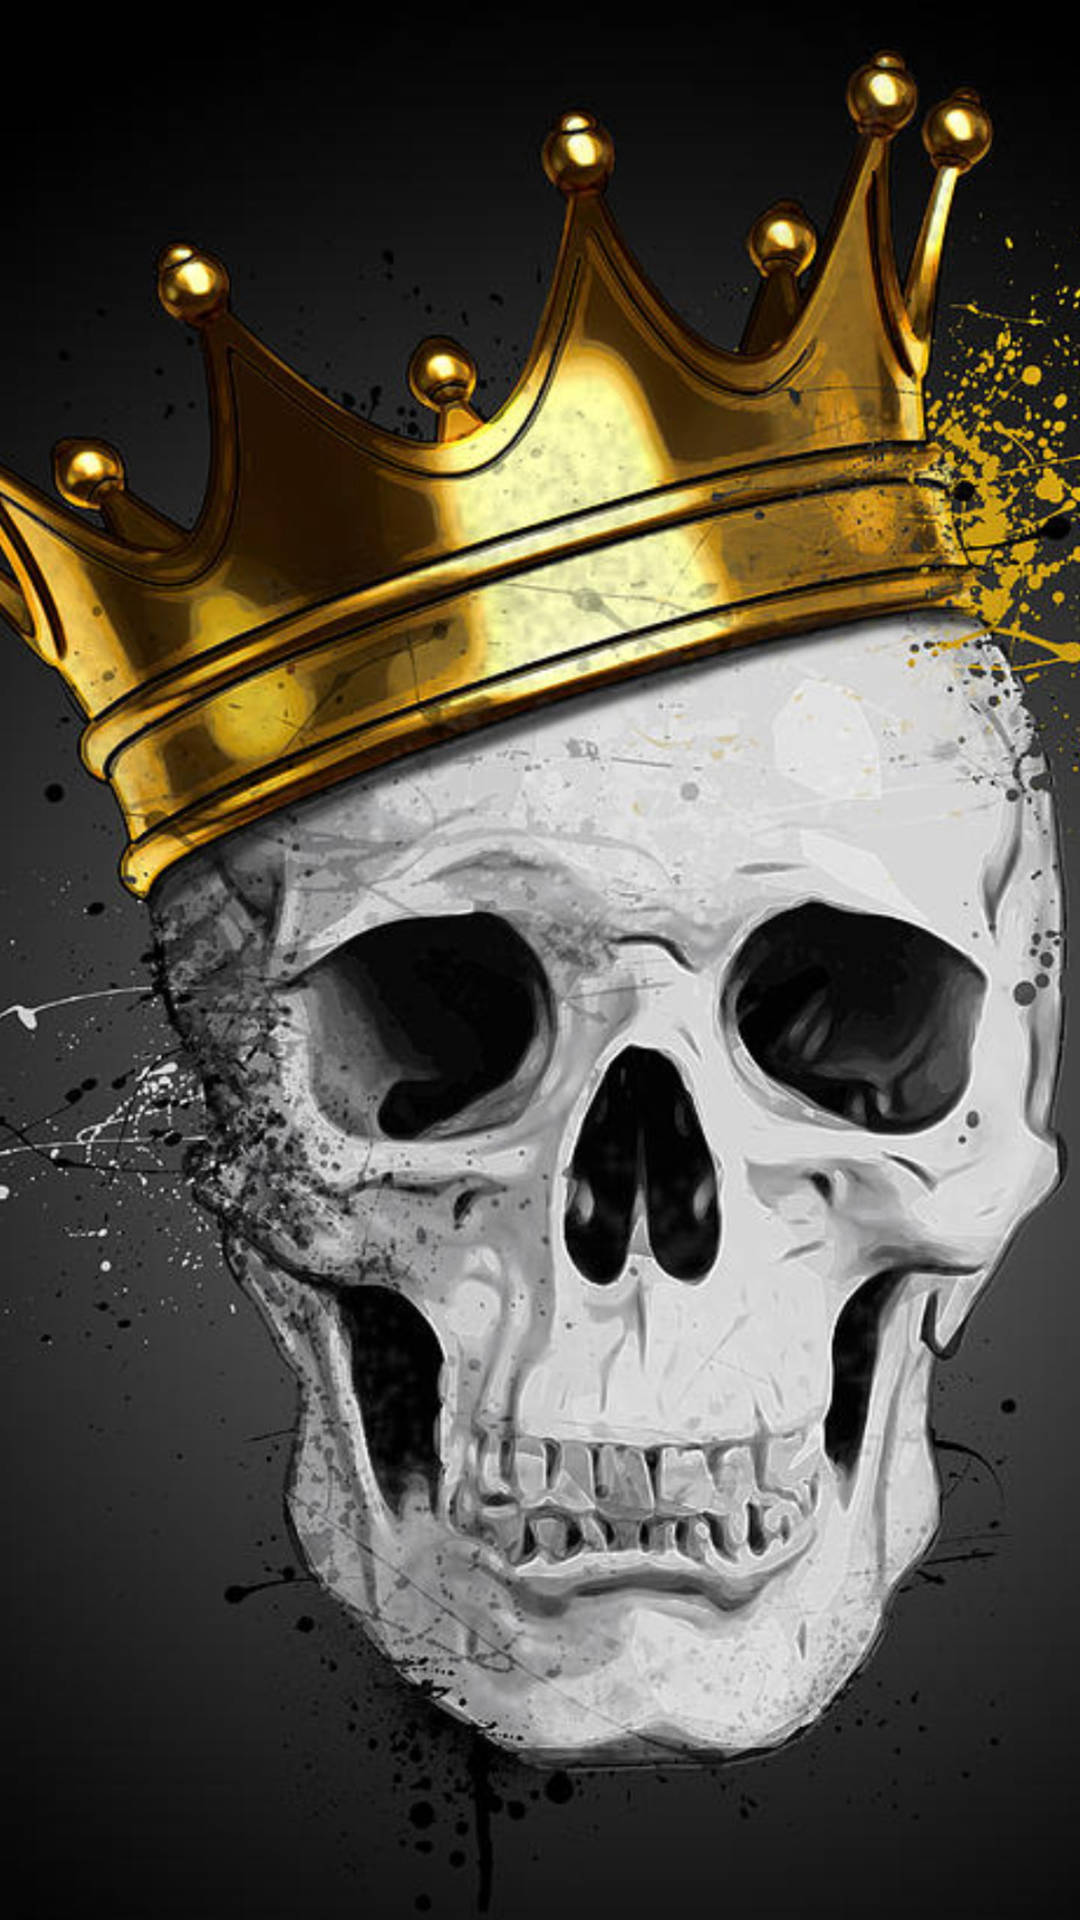 Gangster Skull With Gold Crown Background